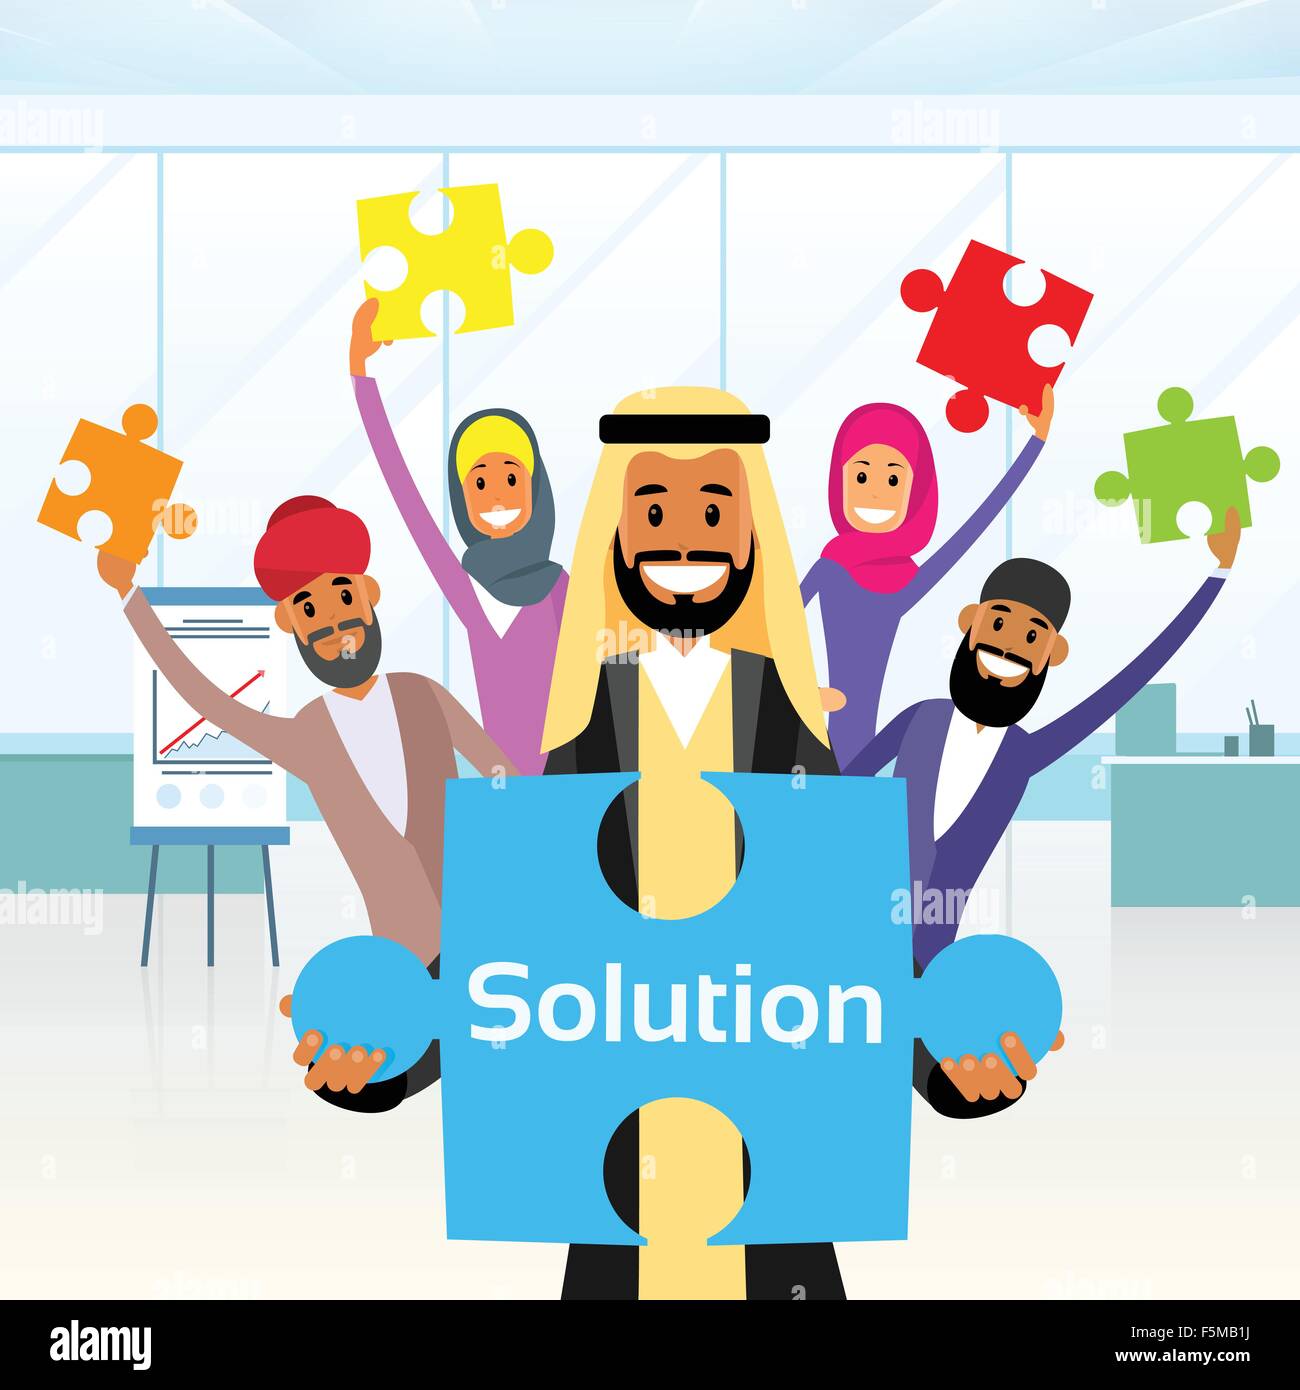 http://c8.alamy.com/comp/F5MB1J/business-people-arab-group-hold-jigsaw-puzzle-piece-concept-of-solution-F5MB1J.jpg